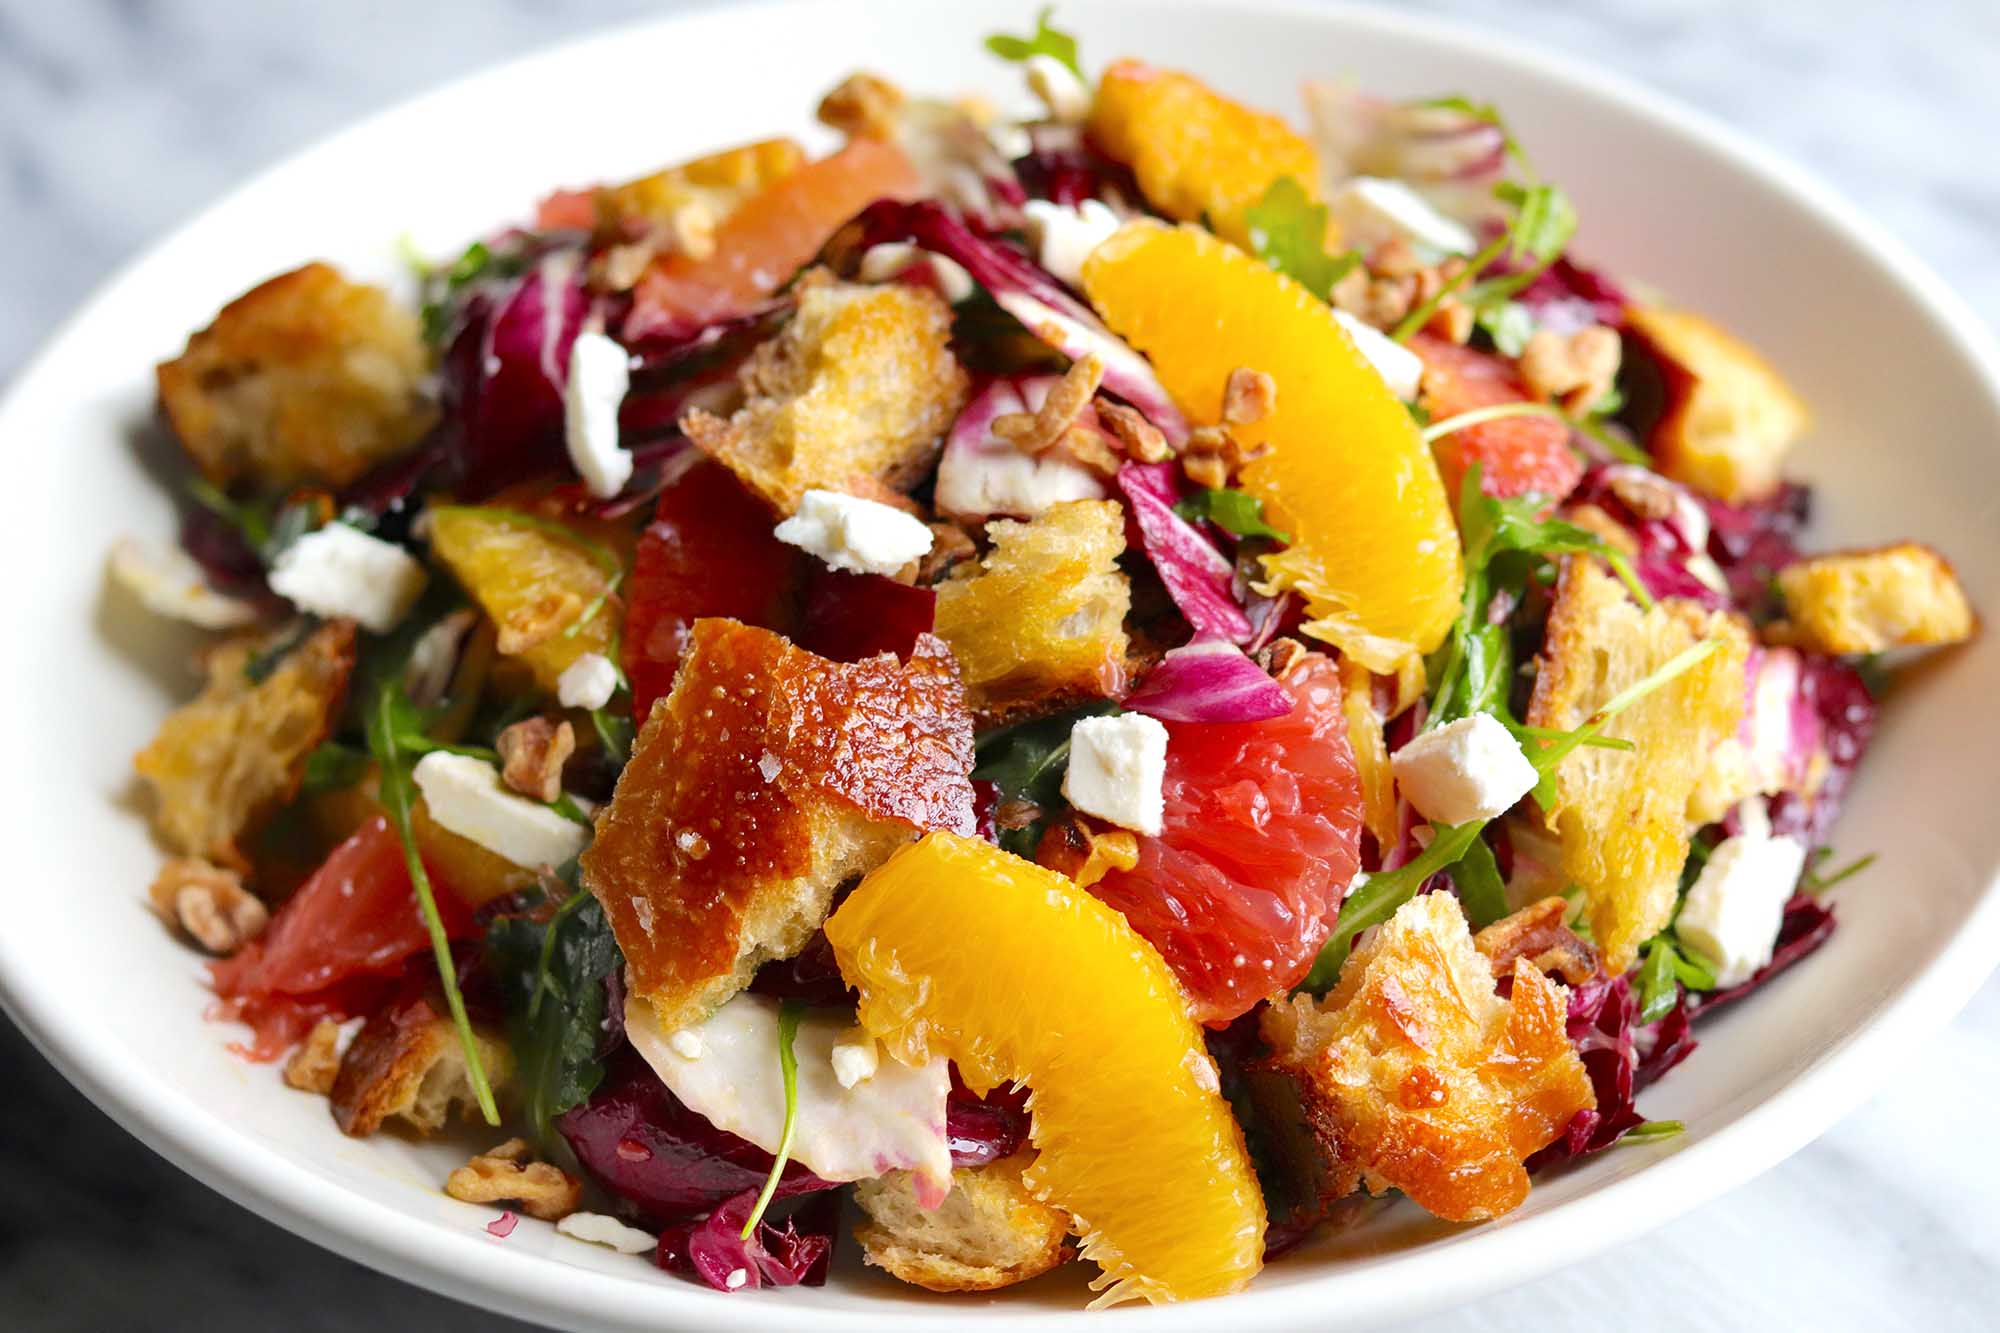 Side view of a winter salad in a white, wide bowl. Supremed orange and grapefruit, radicchio, croutons and feta cheese crumbles are visible.